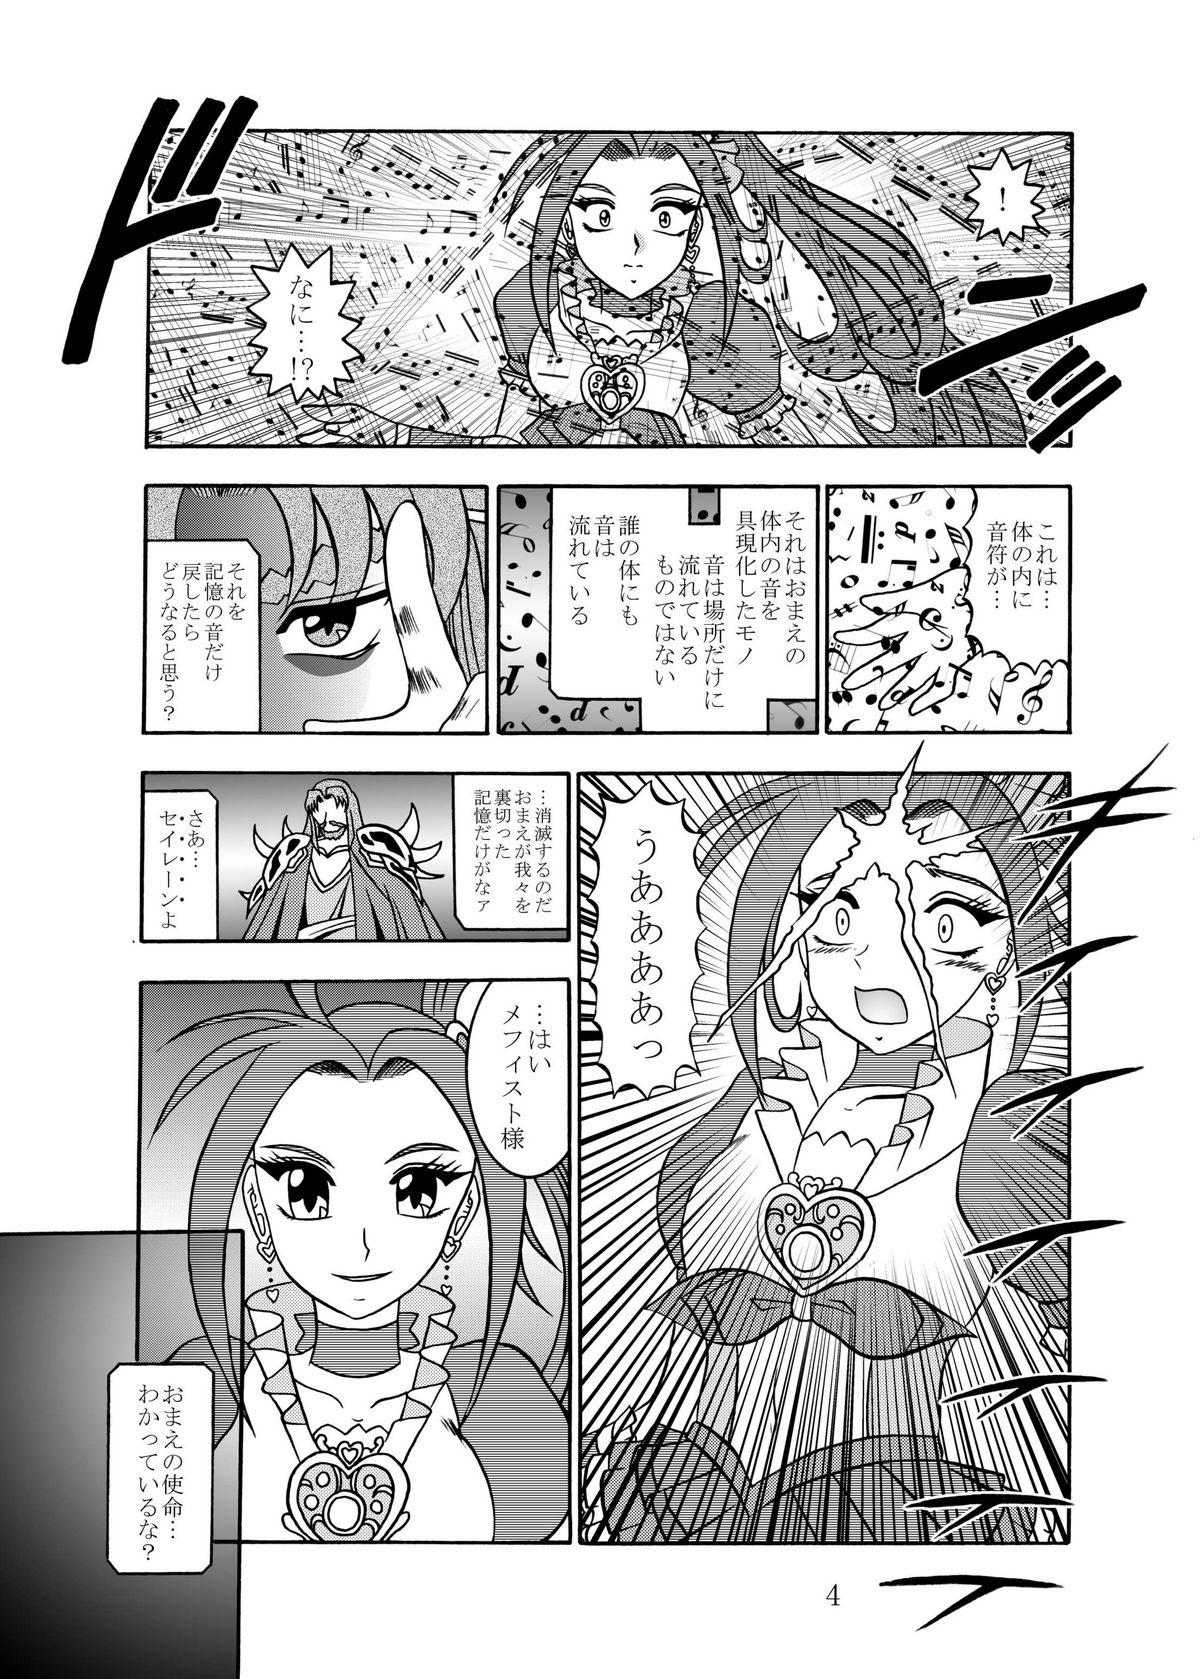 Stepsiblings GREATEST ECLIPSE CrazyRHYTHM - Tsuya sou - Pretty cure Suite precure Whipping - Page 3